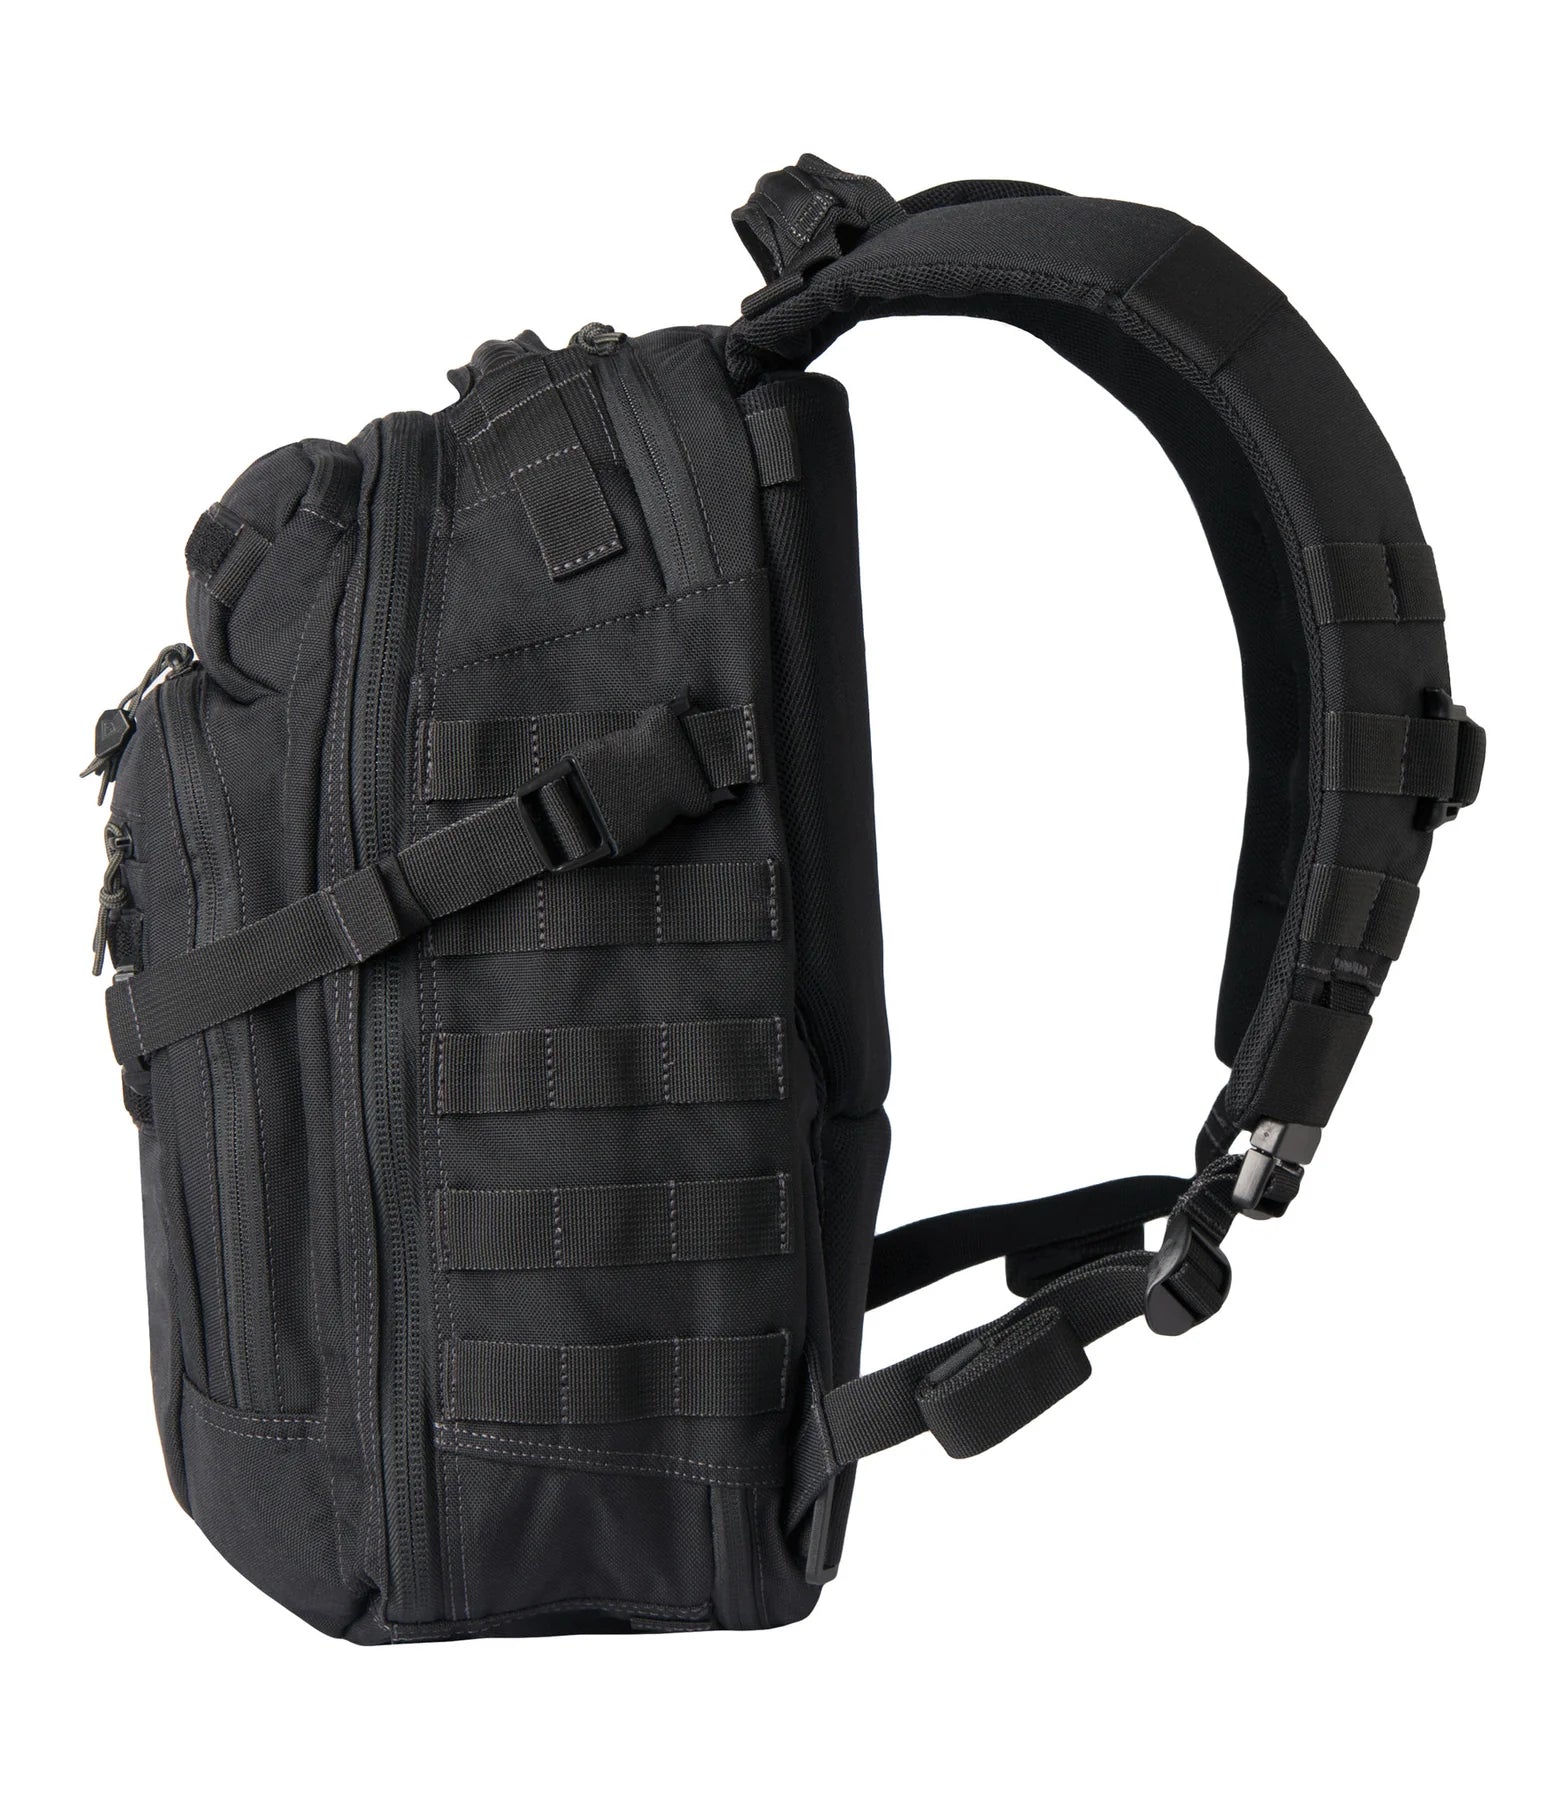 First Tactical Specialist BackPack 0.5D 25L 180006 - Black